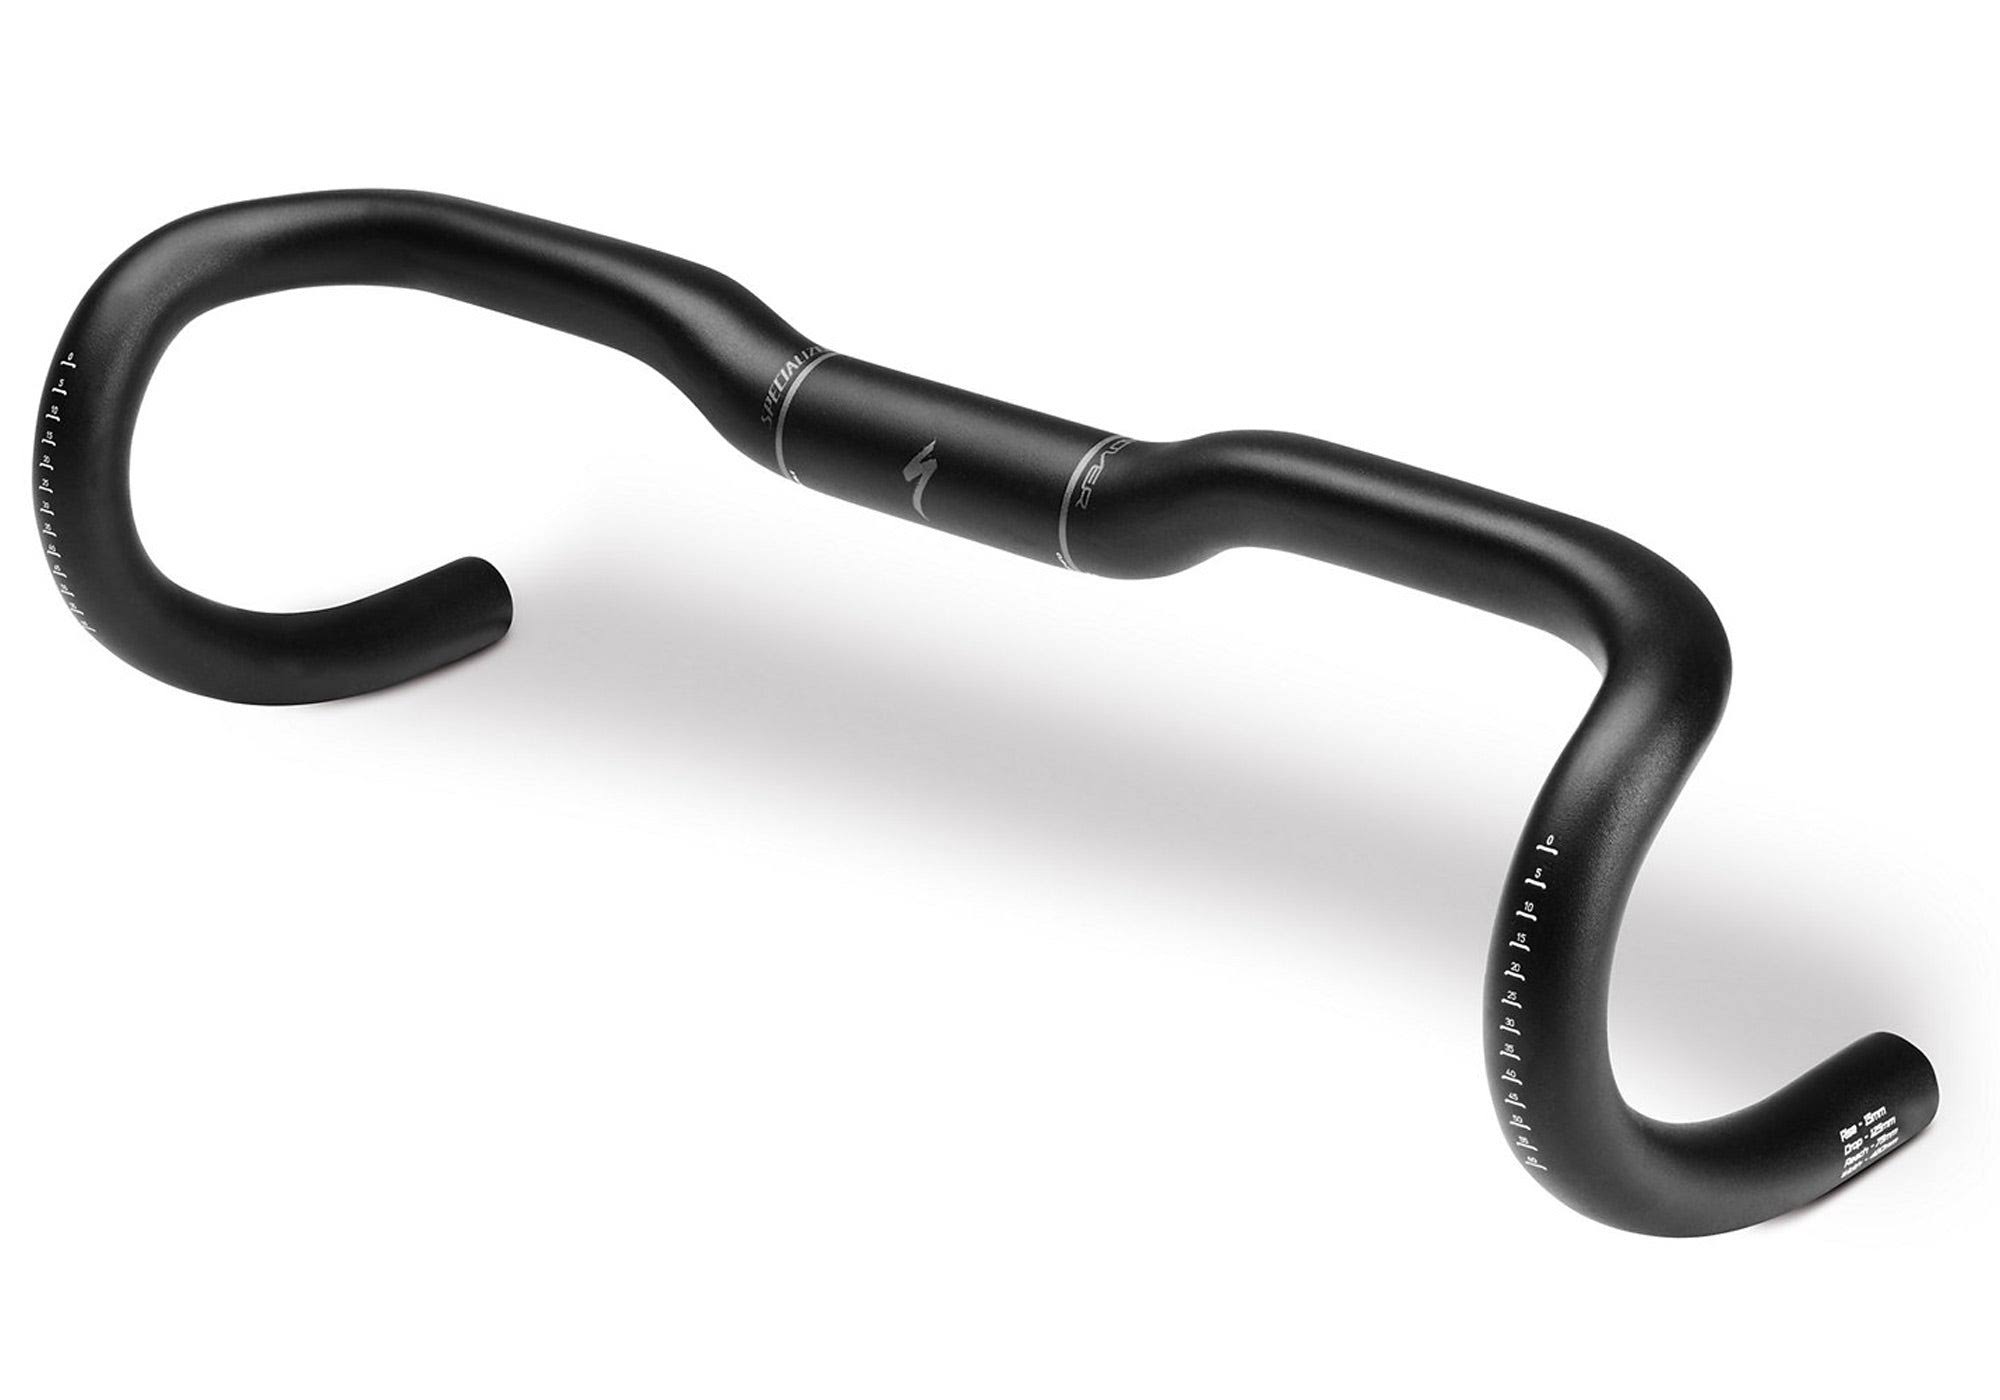 Specialized Hover Expert Alloy Handlebars